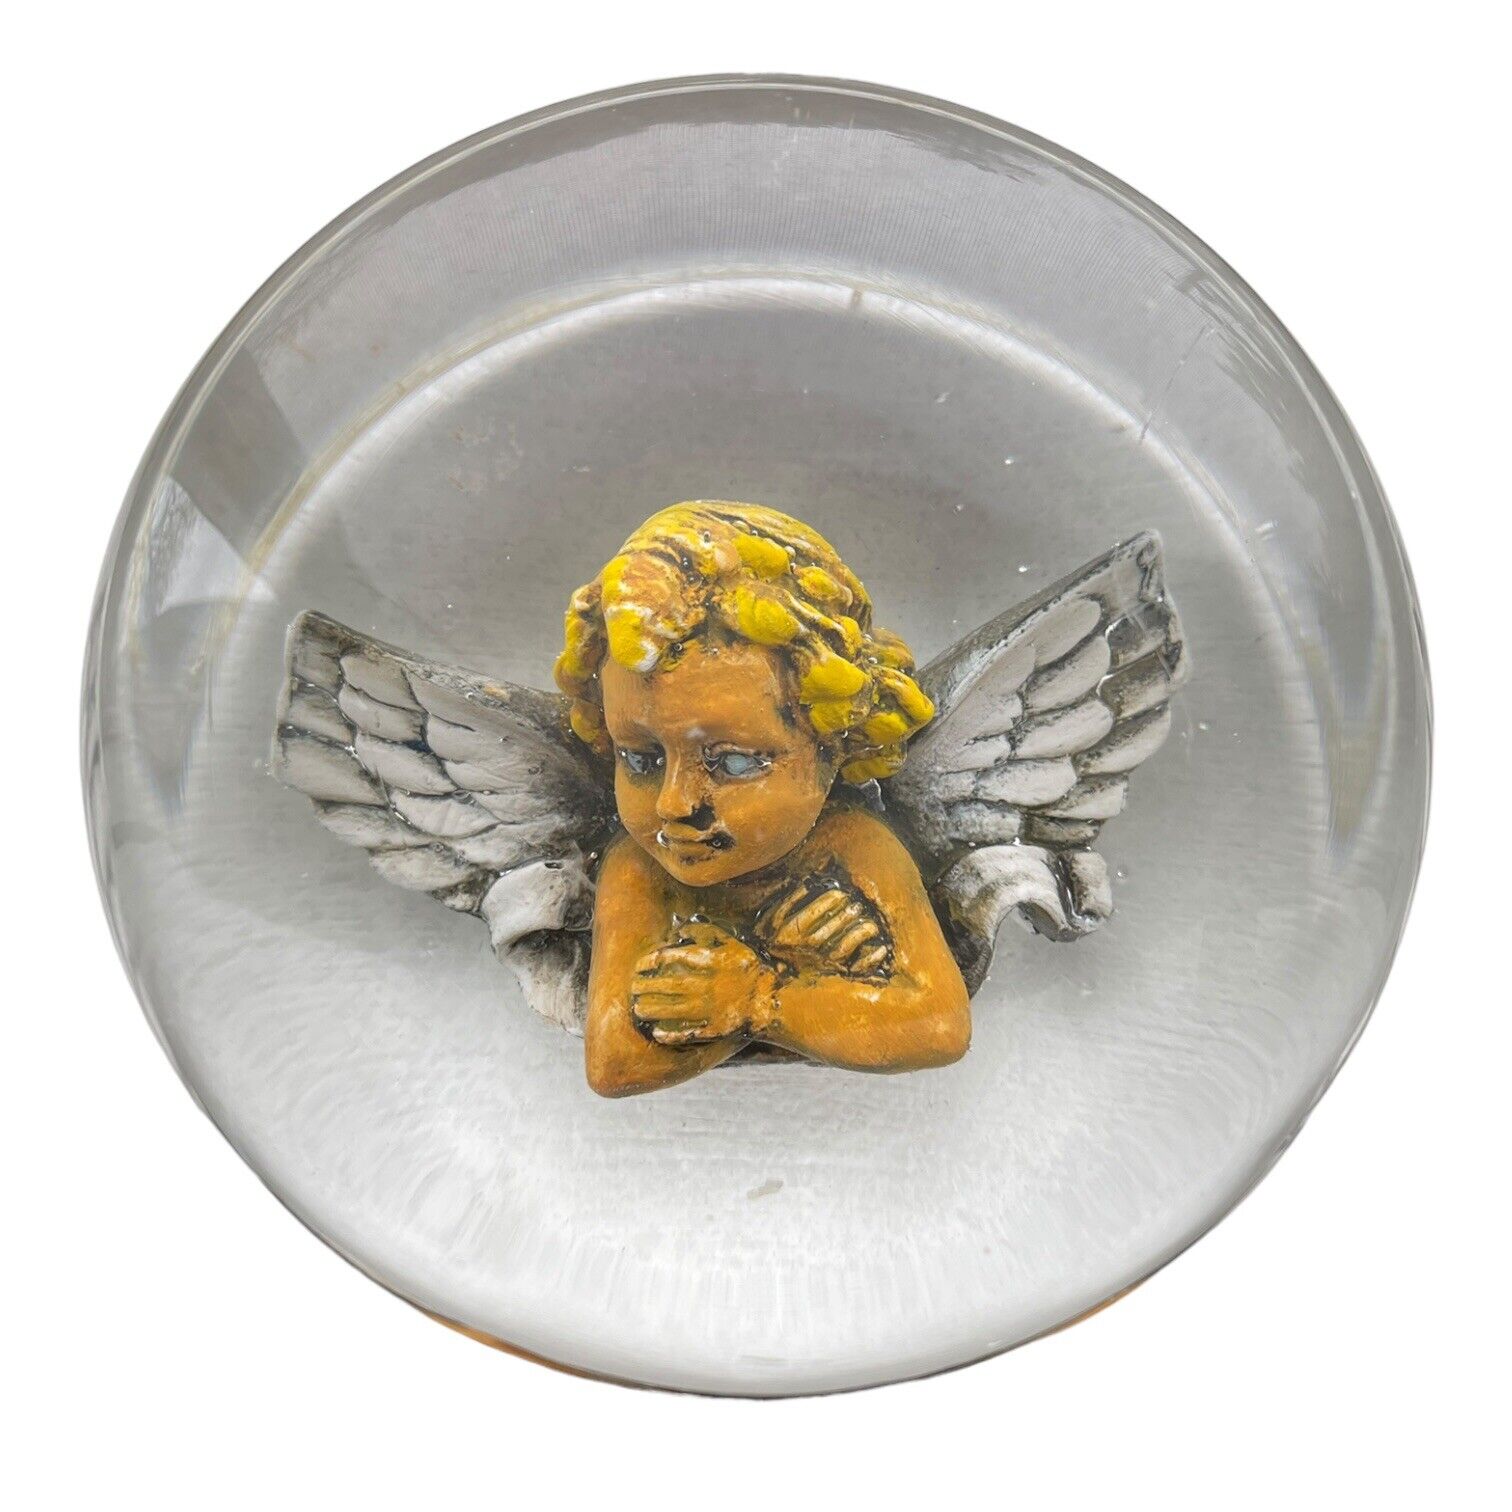 Paperweight Angel Cherub Heavy Rare Andrew Fote? 4.5x3 Controlled Bubbles